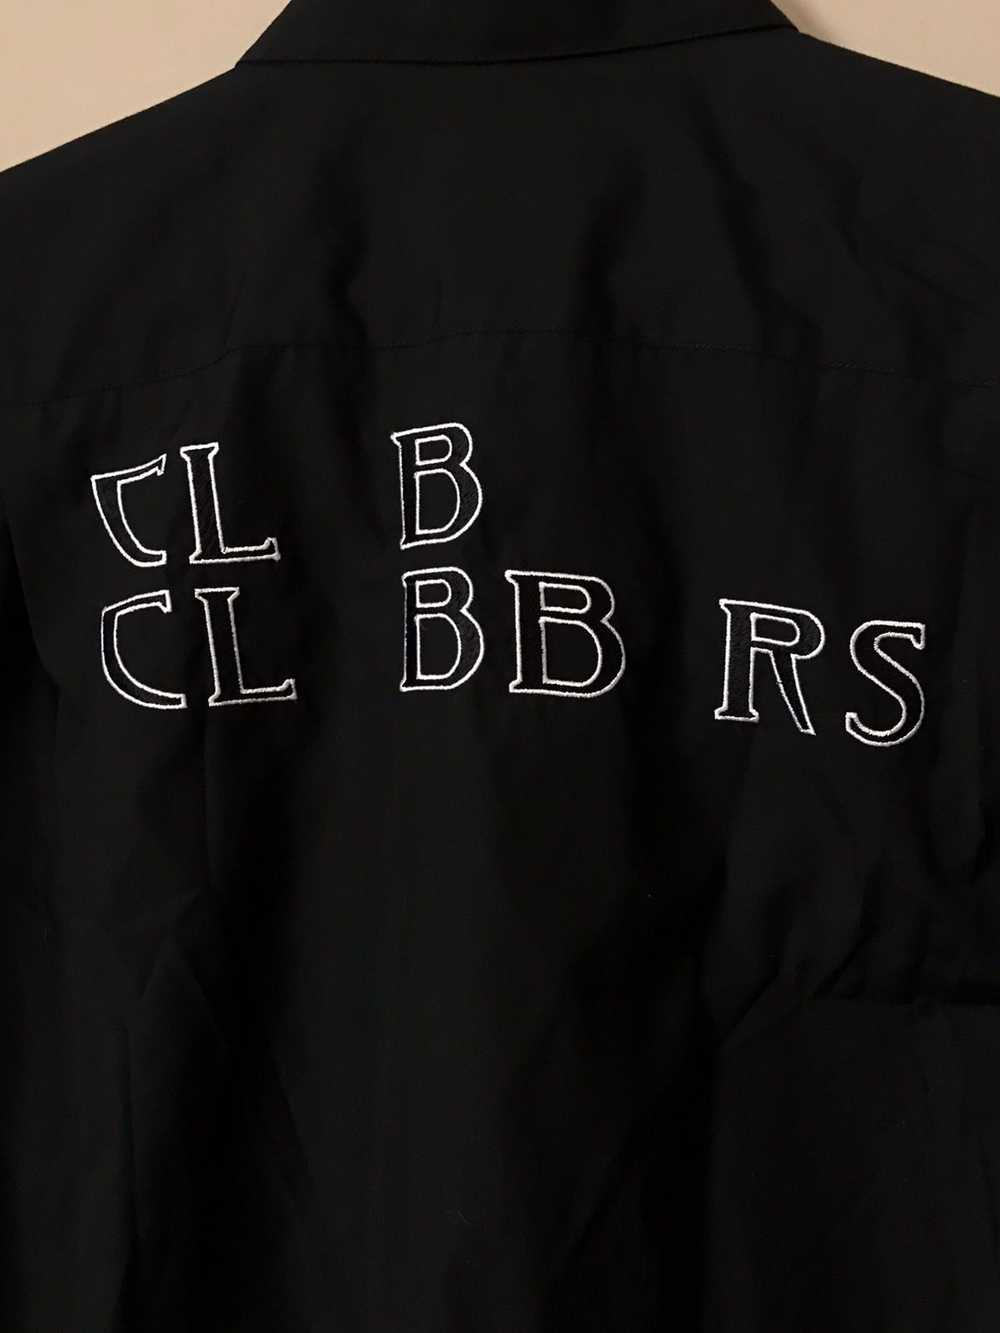 Raf Simons SS19 “Clubbers” Oversized Button Up - image 3